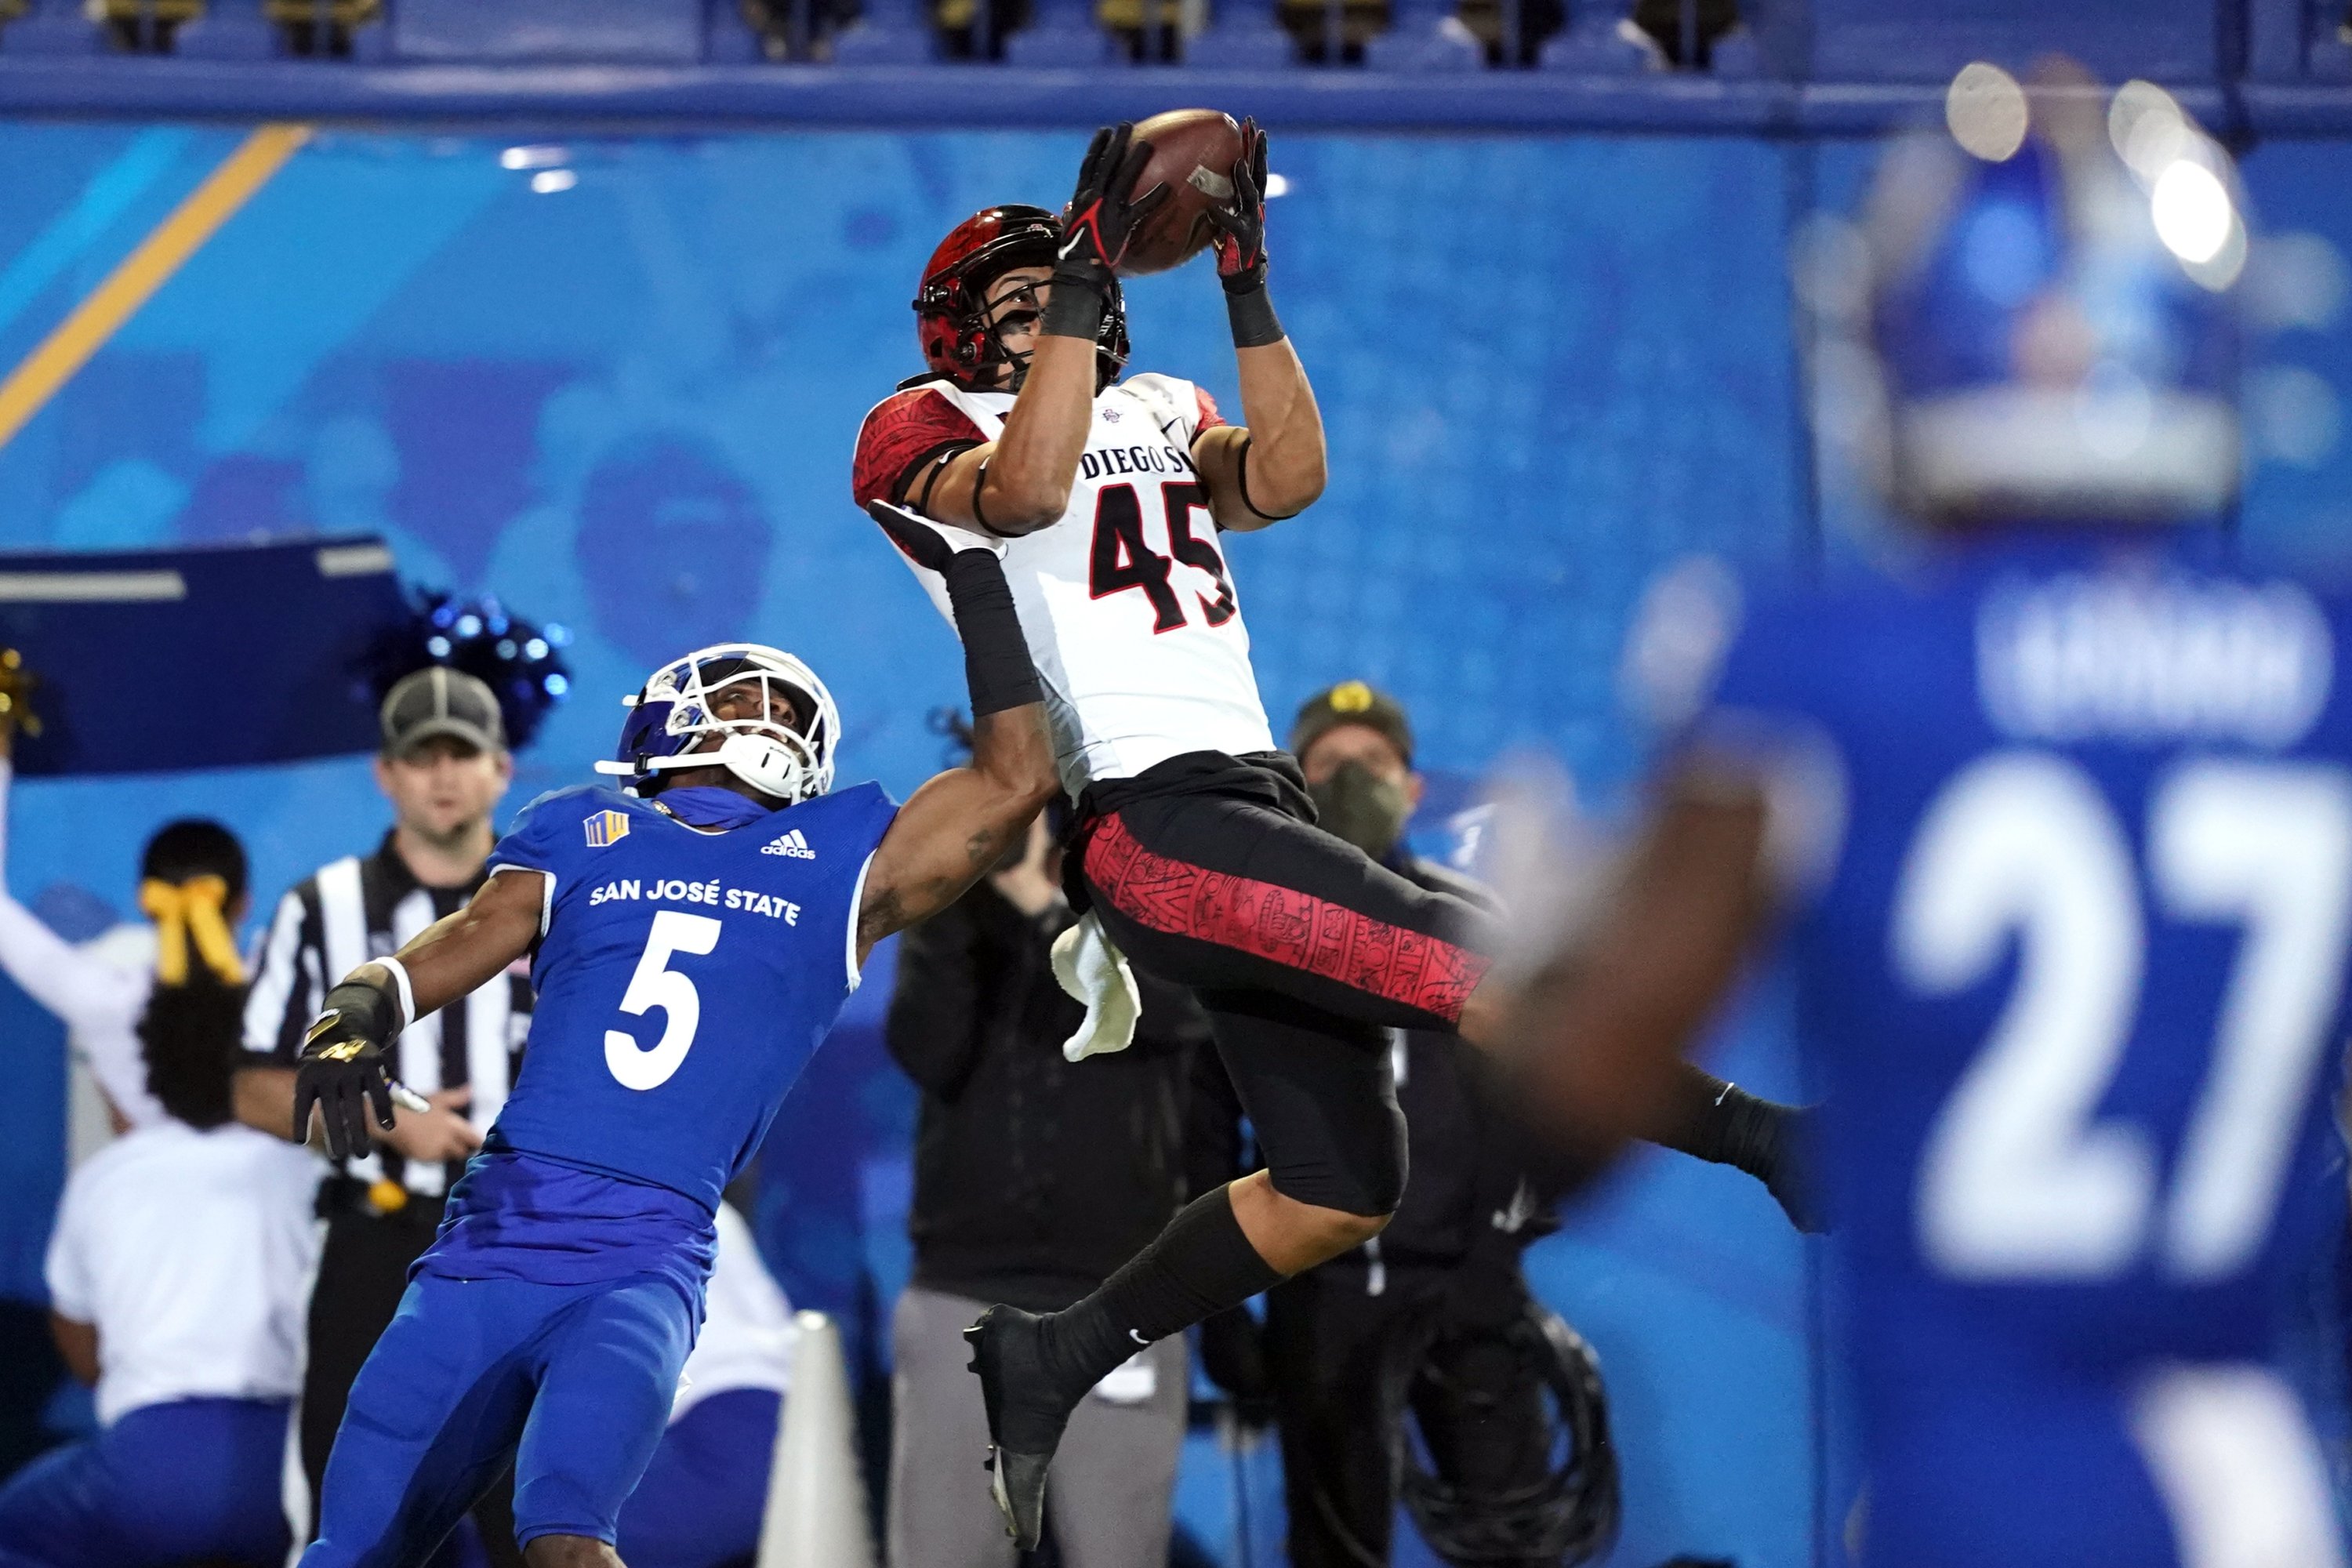 San Diego State Aztecs wide receiver Jesse Matthews (45) catches a touchdown pass over San Jose State Spartans defensive back Bobby Brown II (5) during the overtime period at CEFCU Stadium, San Jose, California, U.S., Oct. 15, 2021. (Darren Yamashita-USA TODAY Sports via Reuters)